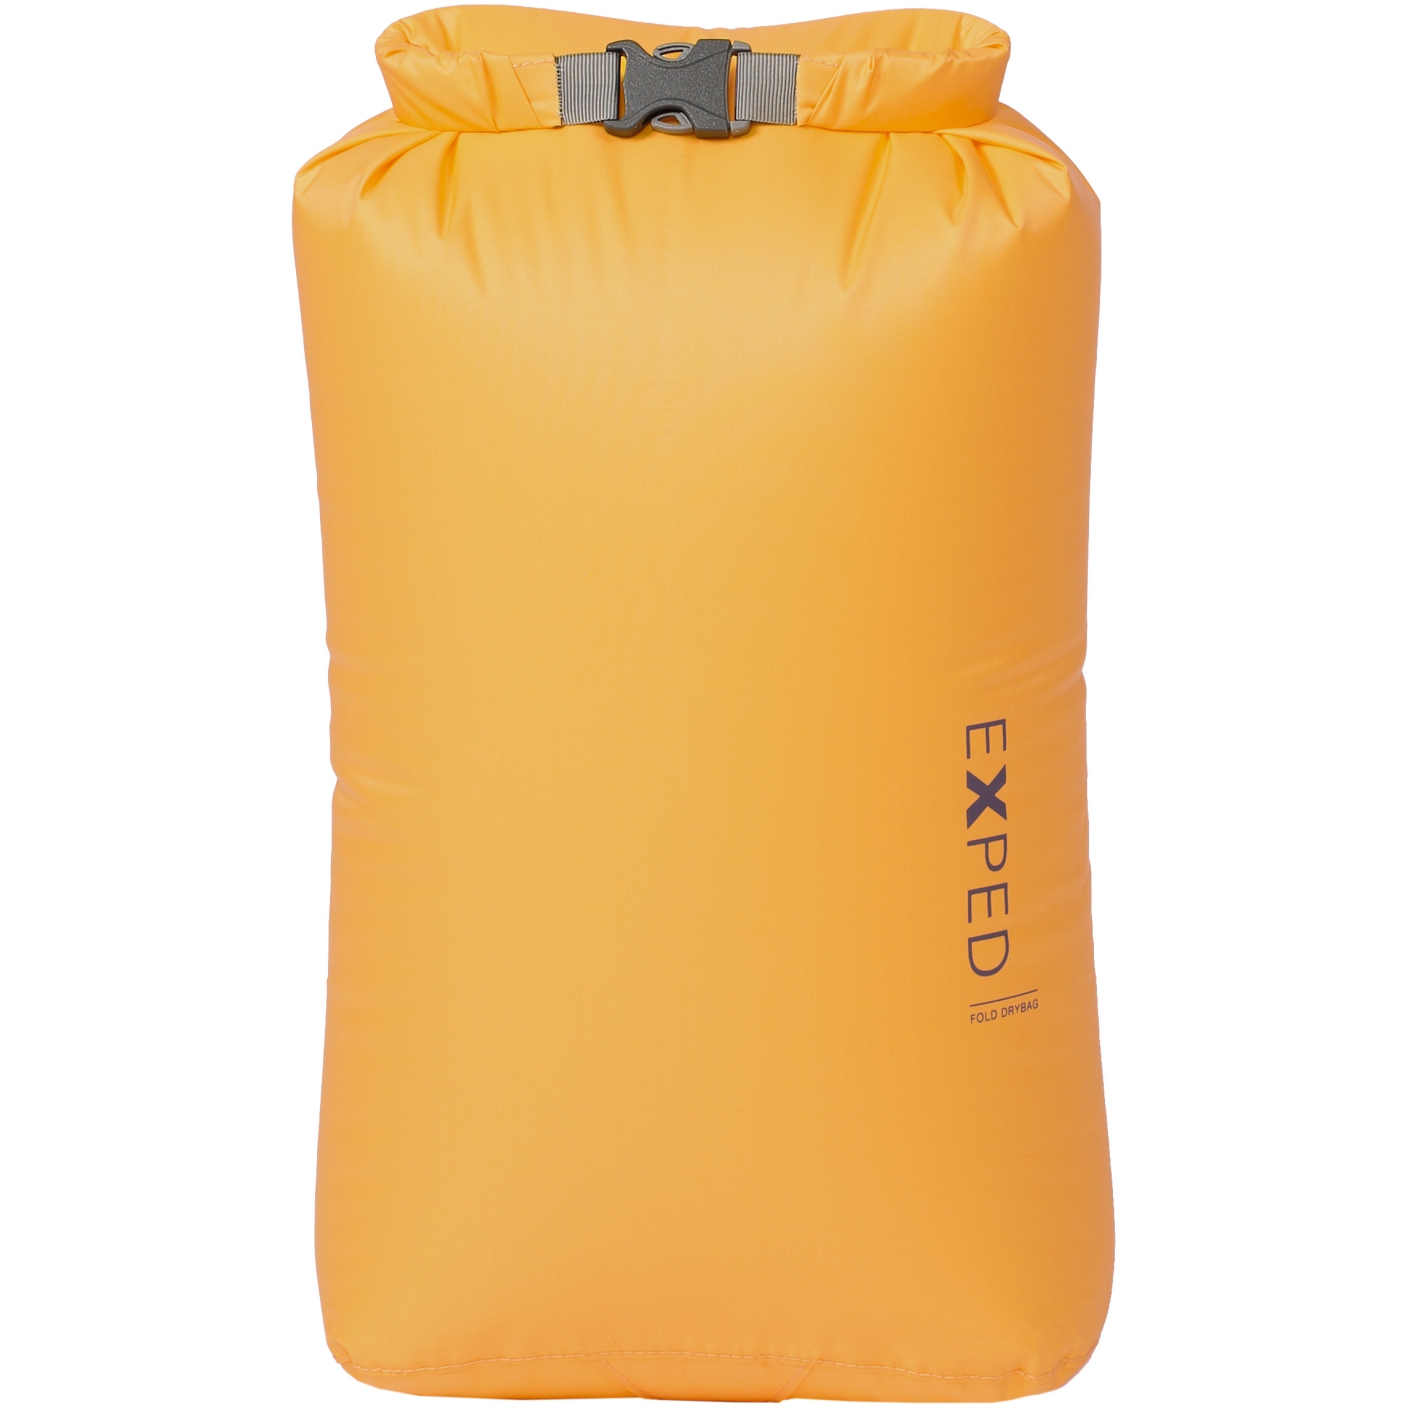 Image of Exped Fold Drybag - S - corn yellow